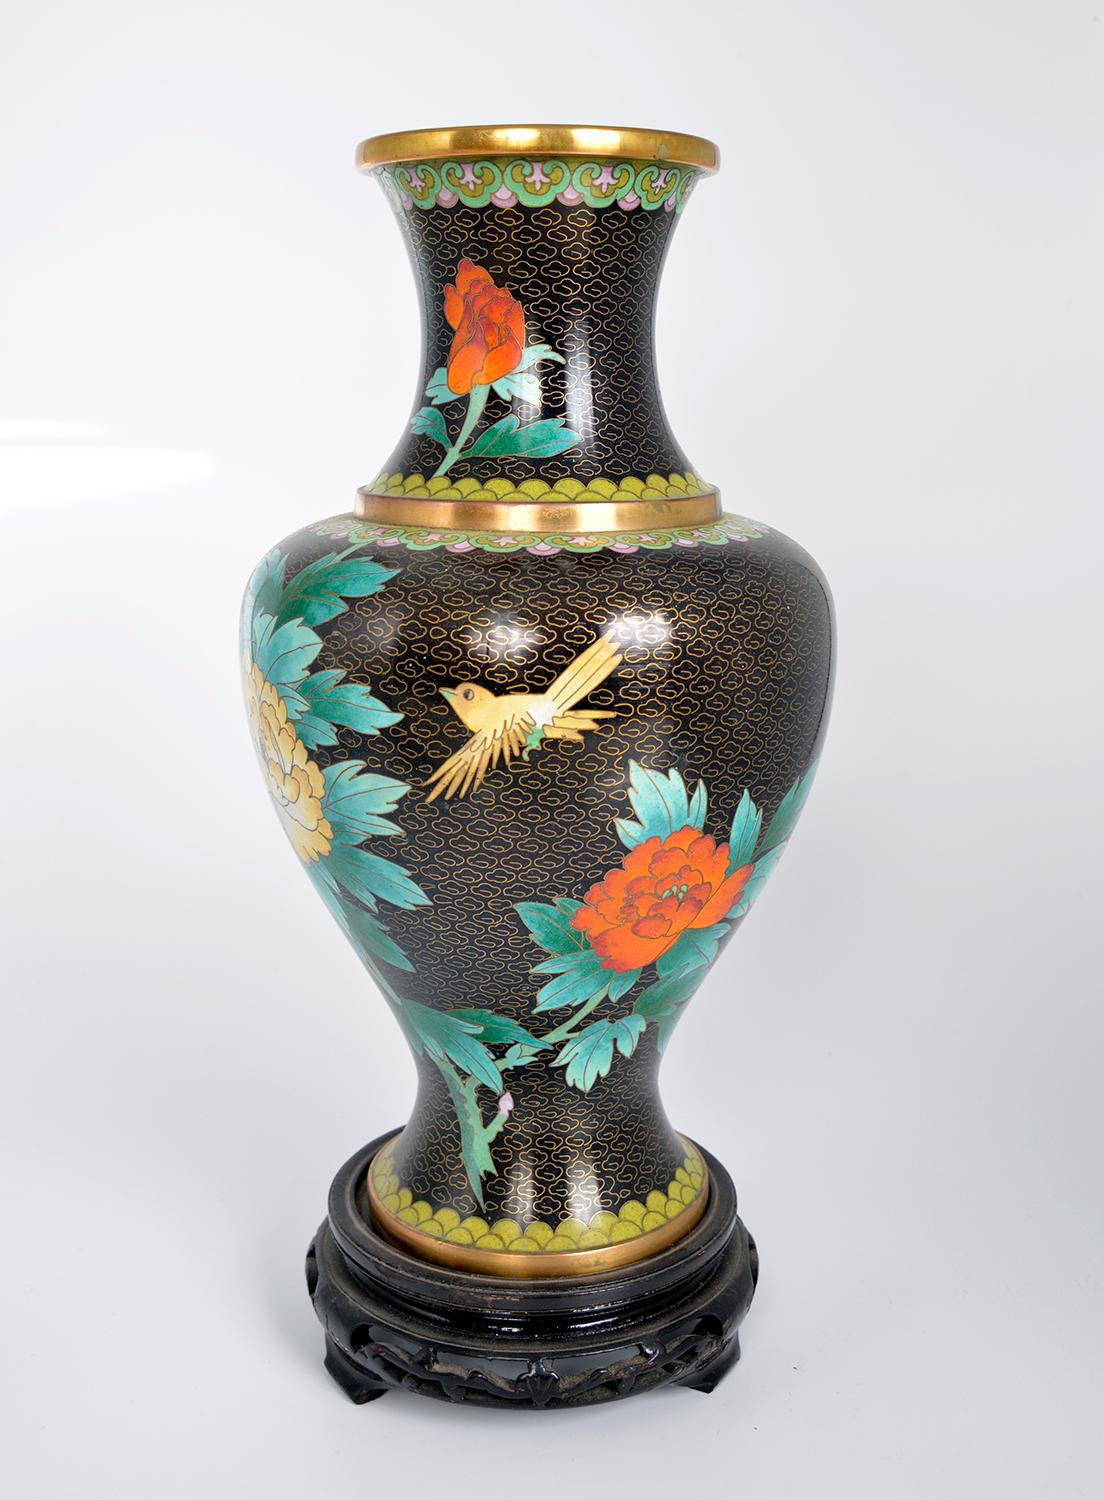 Chinese enamel and brass Zi Jin Cheng floral cloisonné vase that sits on a carved ebonised wooden stand. The vase has a black and gold background featuring various flowers and foliage in rich colours, including a lotus flower, rose, carnation and a